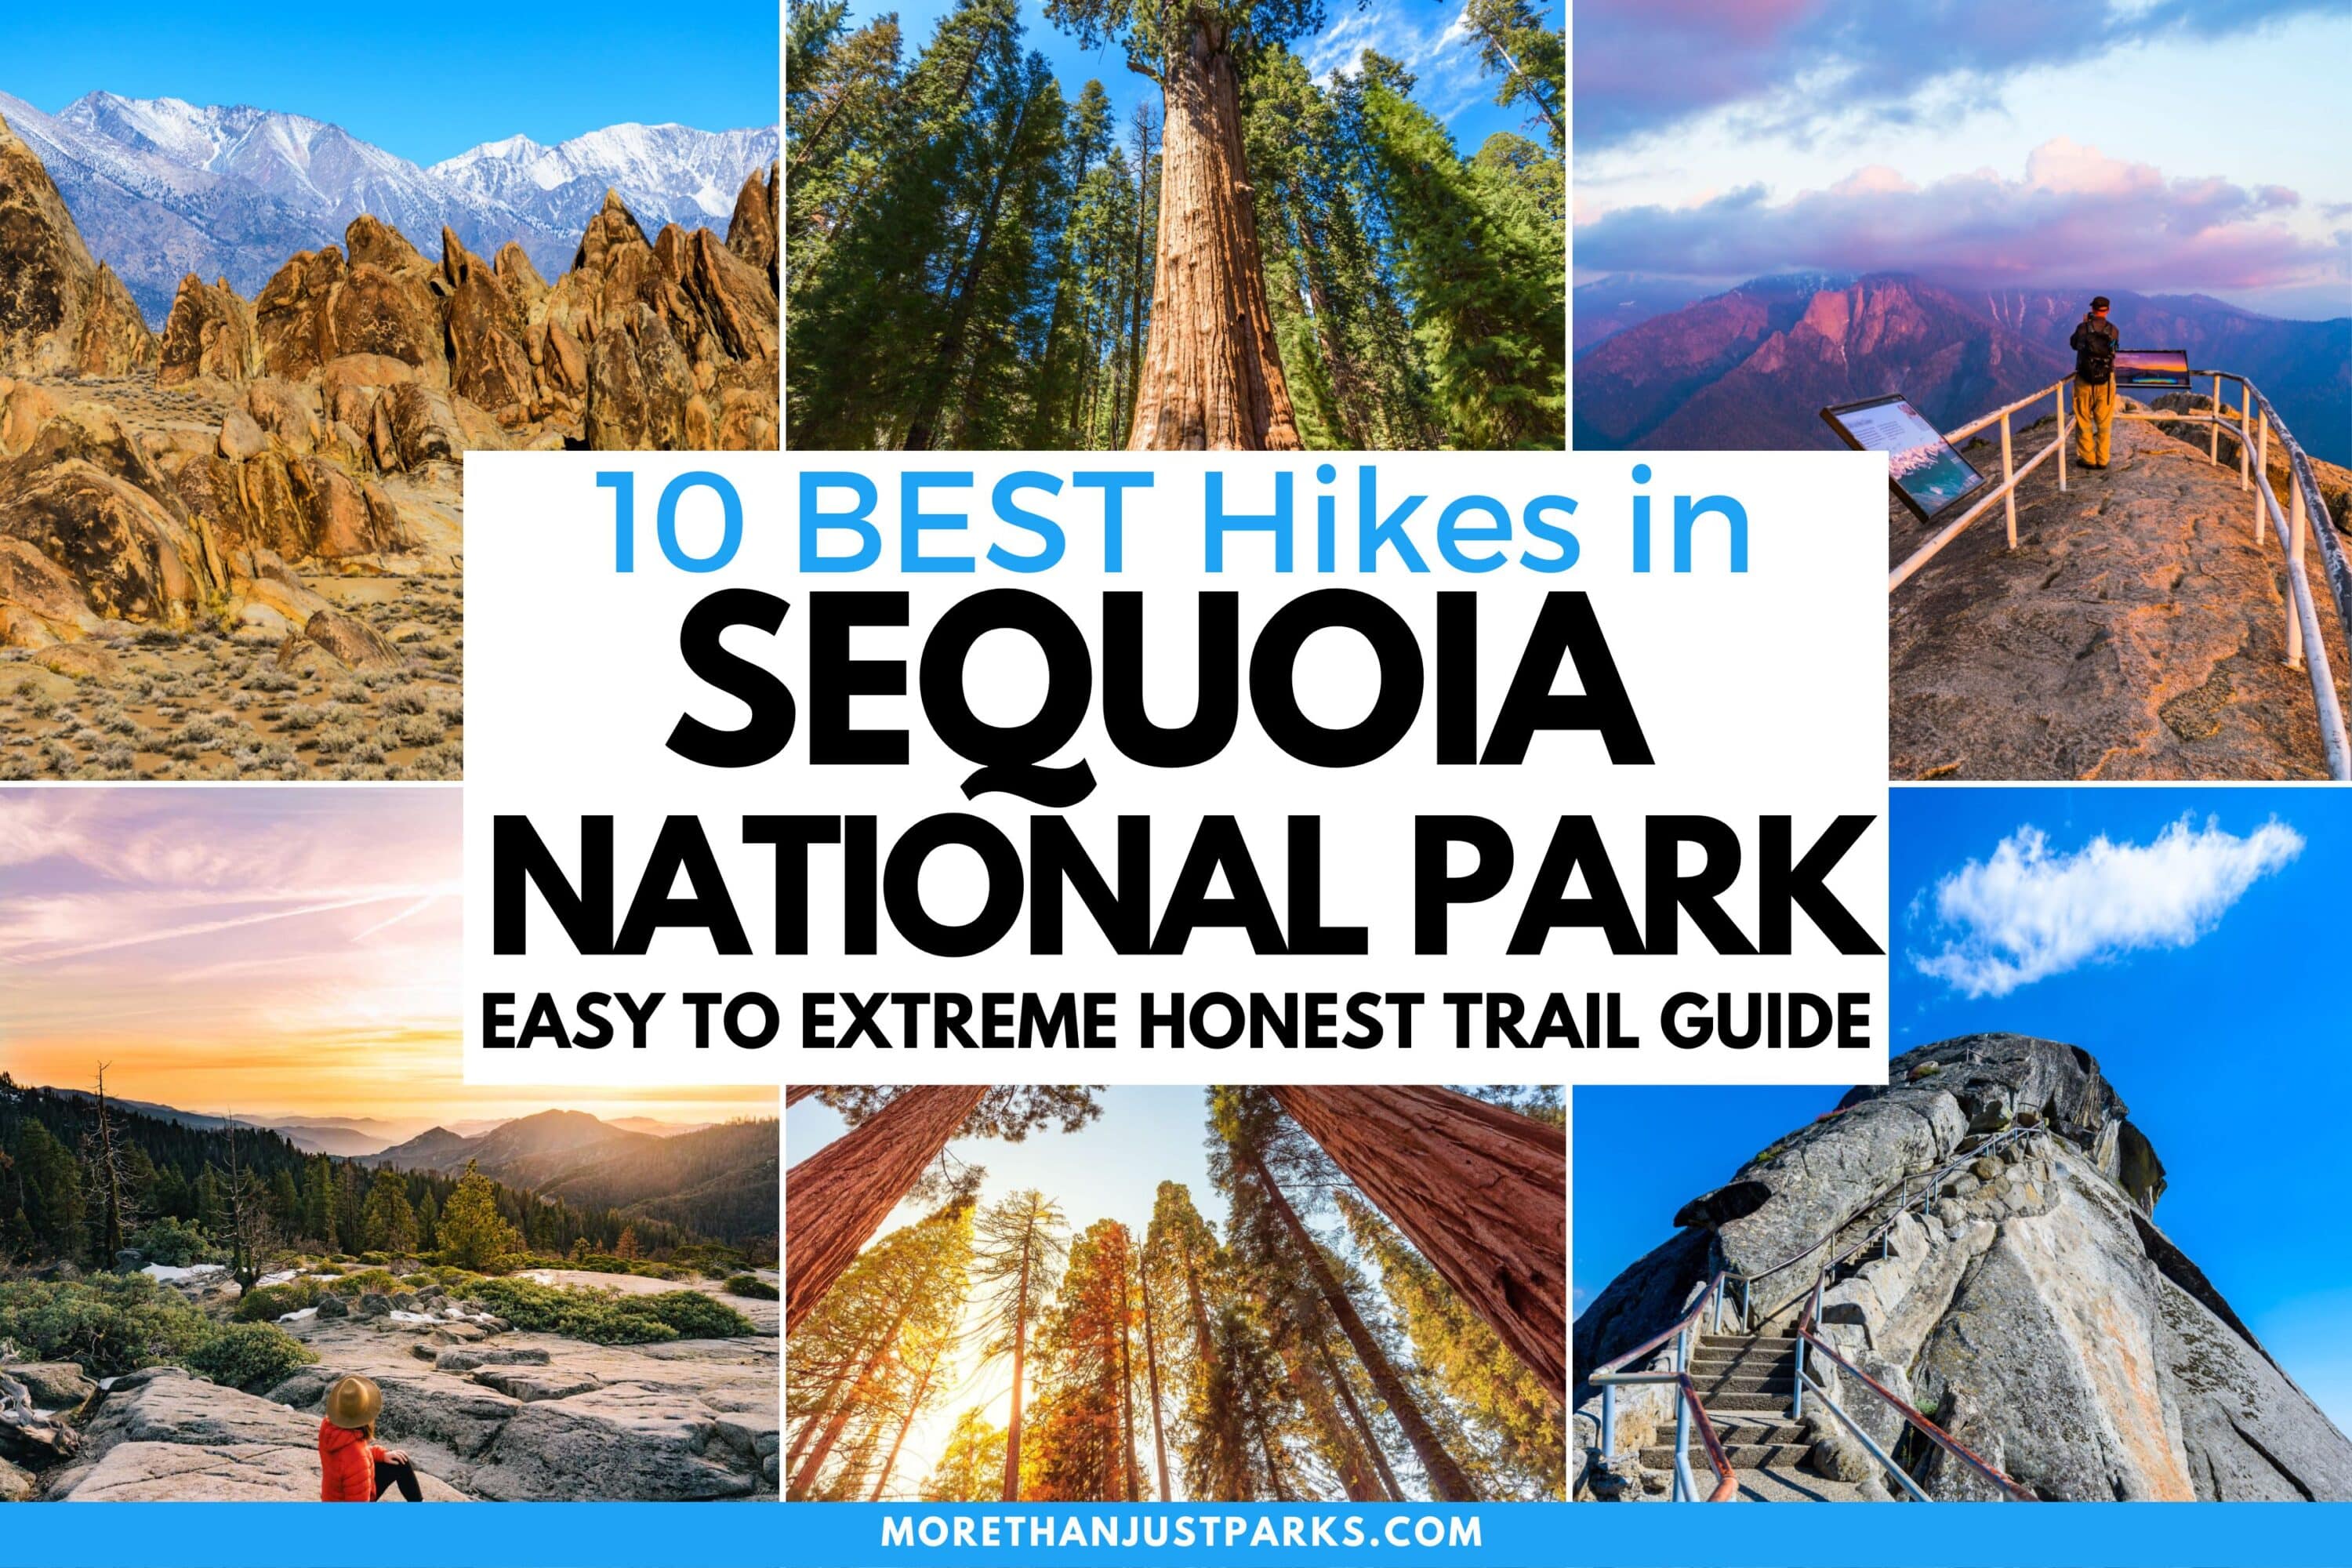 Graphic reads "10 Best Hikes in Sequoia National Park - Easy to Extreme Honest Trail Guise."